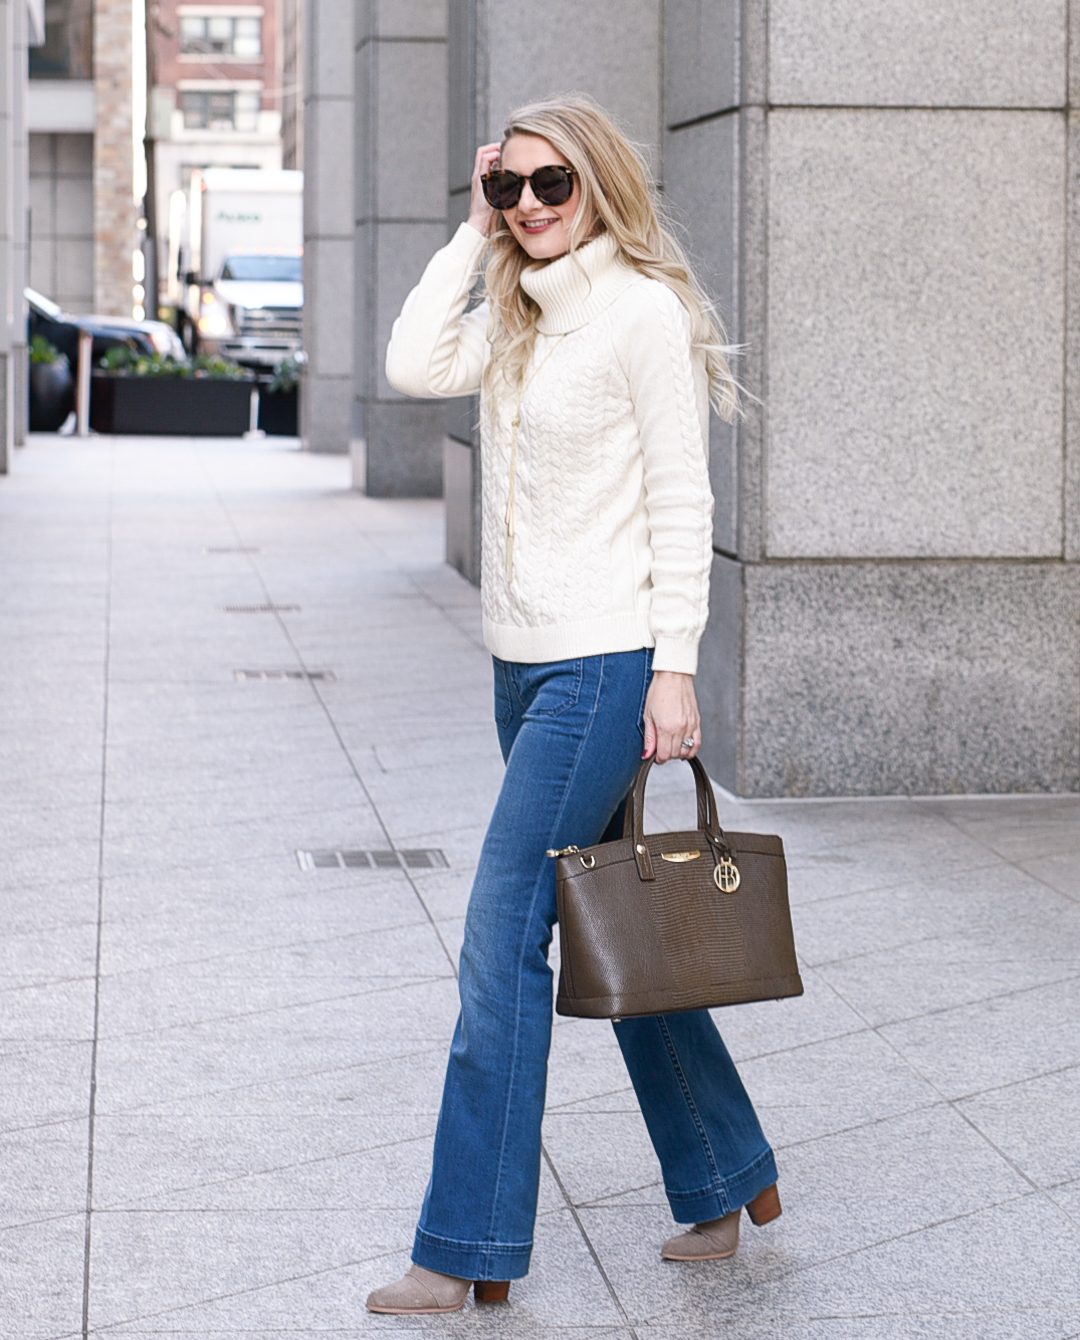 Downtown in a White Cable Knit Sweater - Sparkles and Shoes